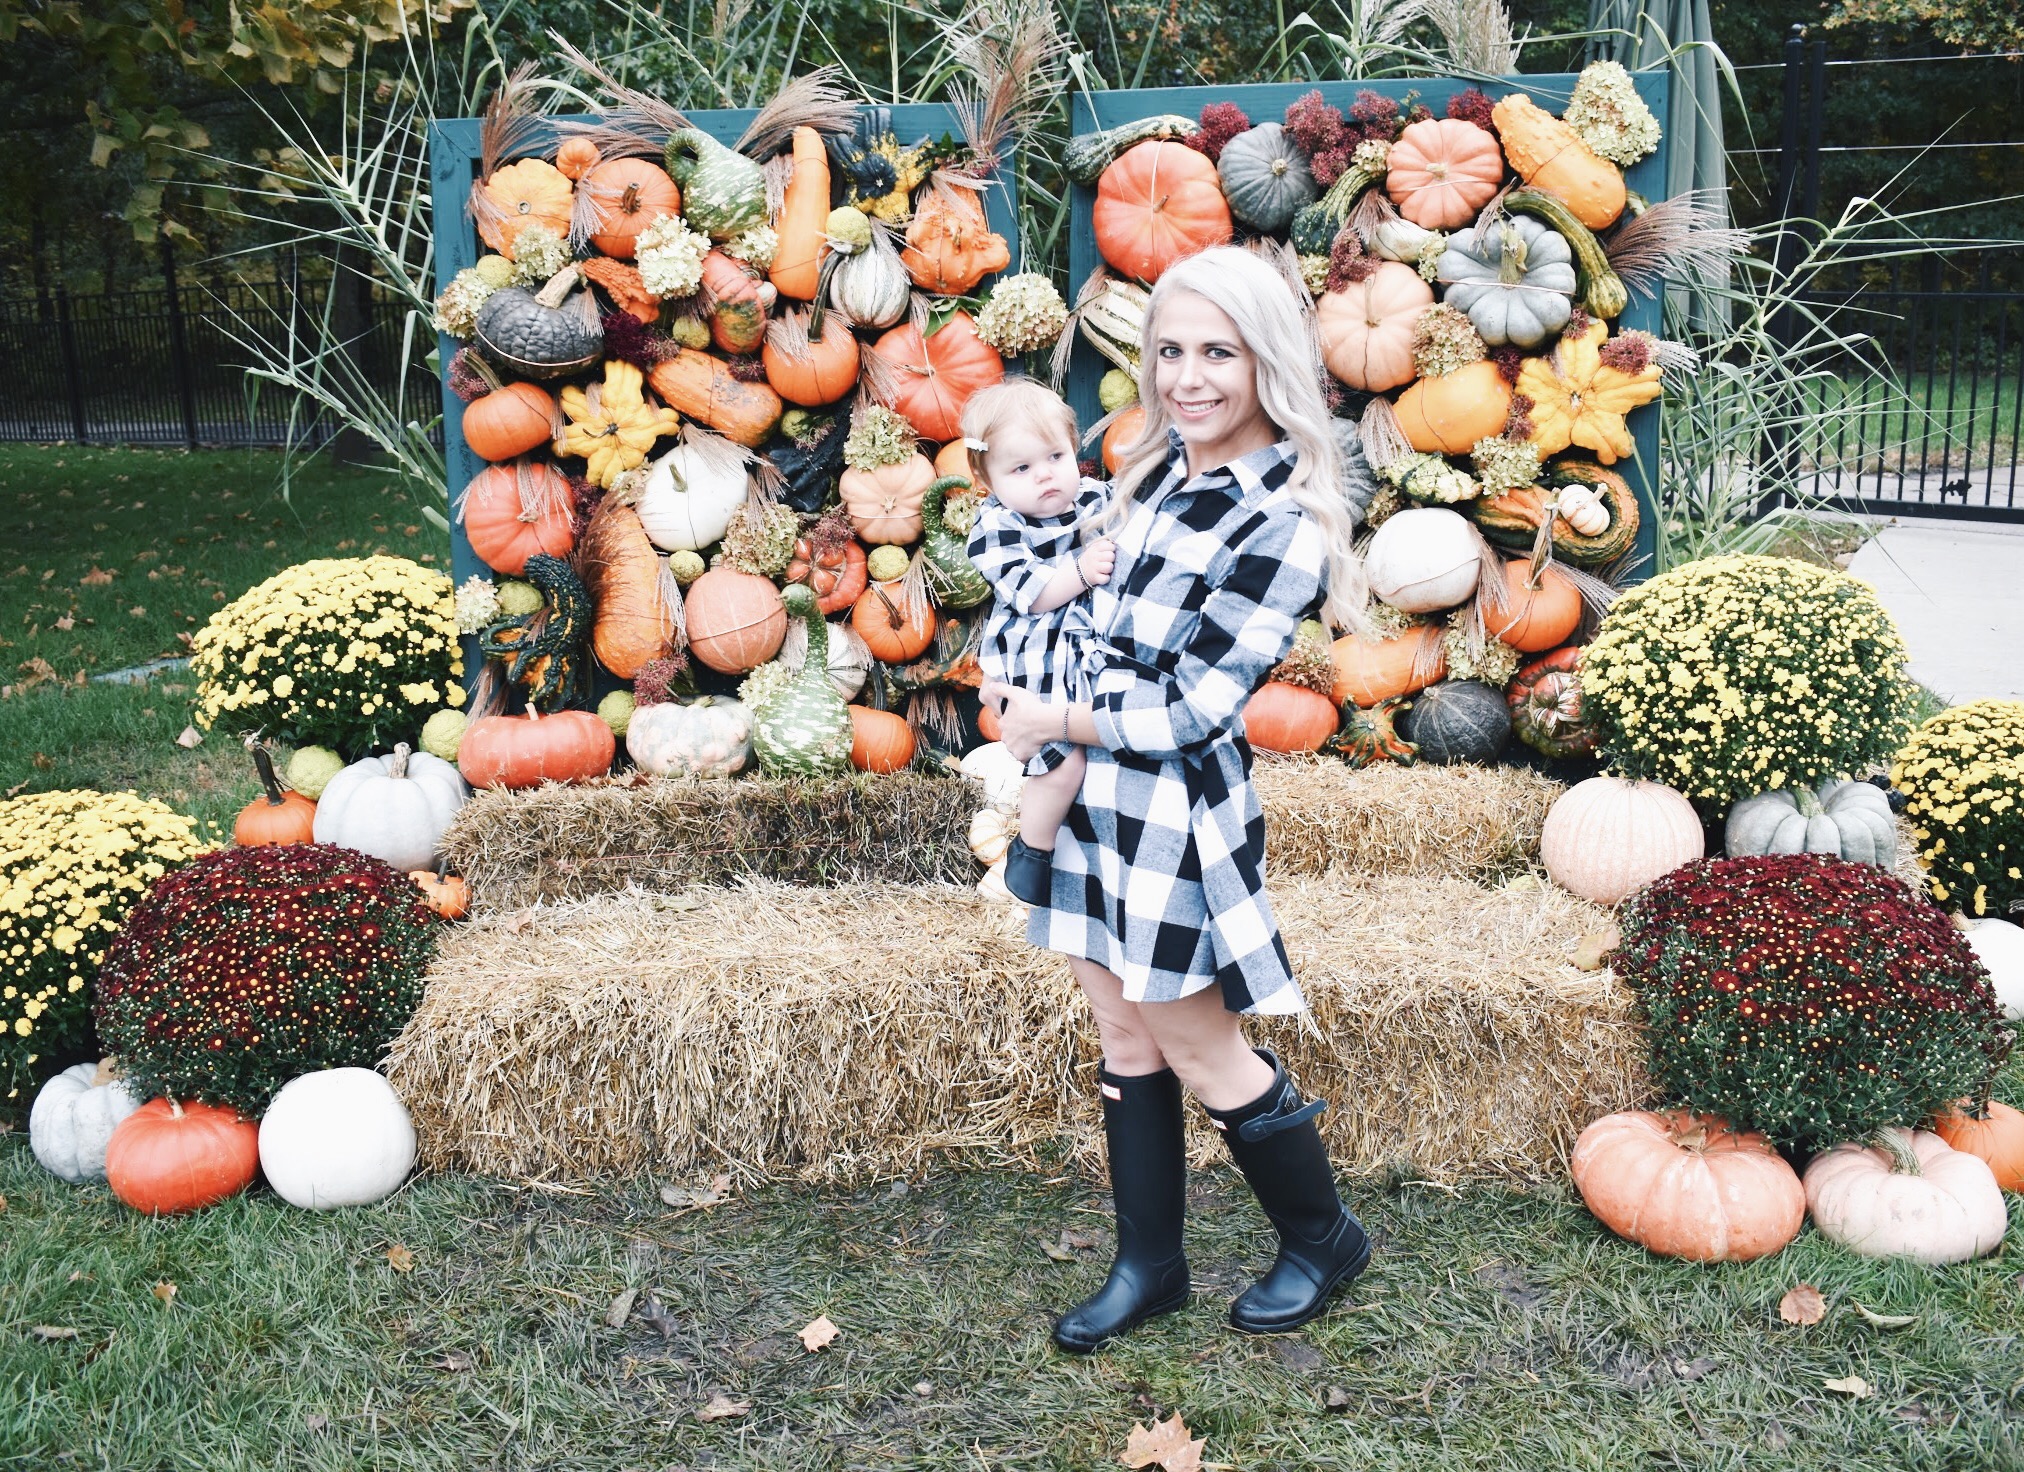 Mommy and Me Dresses - Fall Matching Clothes for Mommy and Daughter. These Mommy and Me plaid dresses are perfect for twinning with your mini me. Best of all, they're super affordable -- you can get both dresses for around $30 total! Perfect Mommy and Me outfit inspo from fashion blogger Tricia Nibarger of COVET by tricia, showcasing plaid dresses for Mom and Daughter. #MommyandMe #GirlMom #LikeTKit